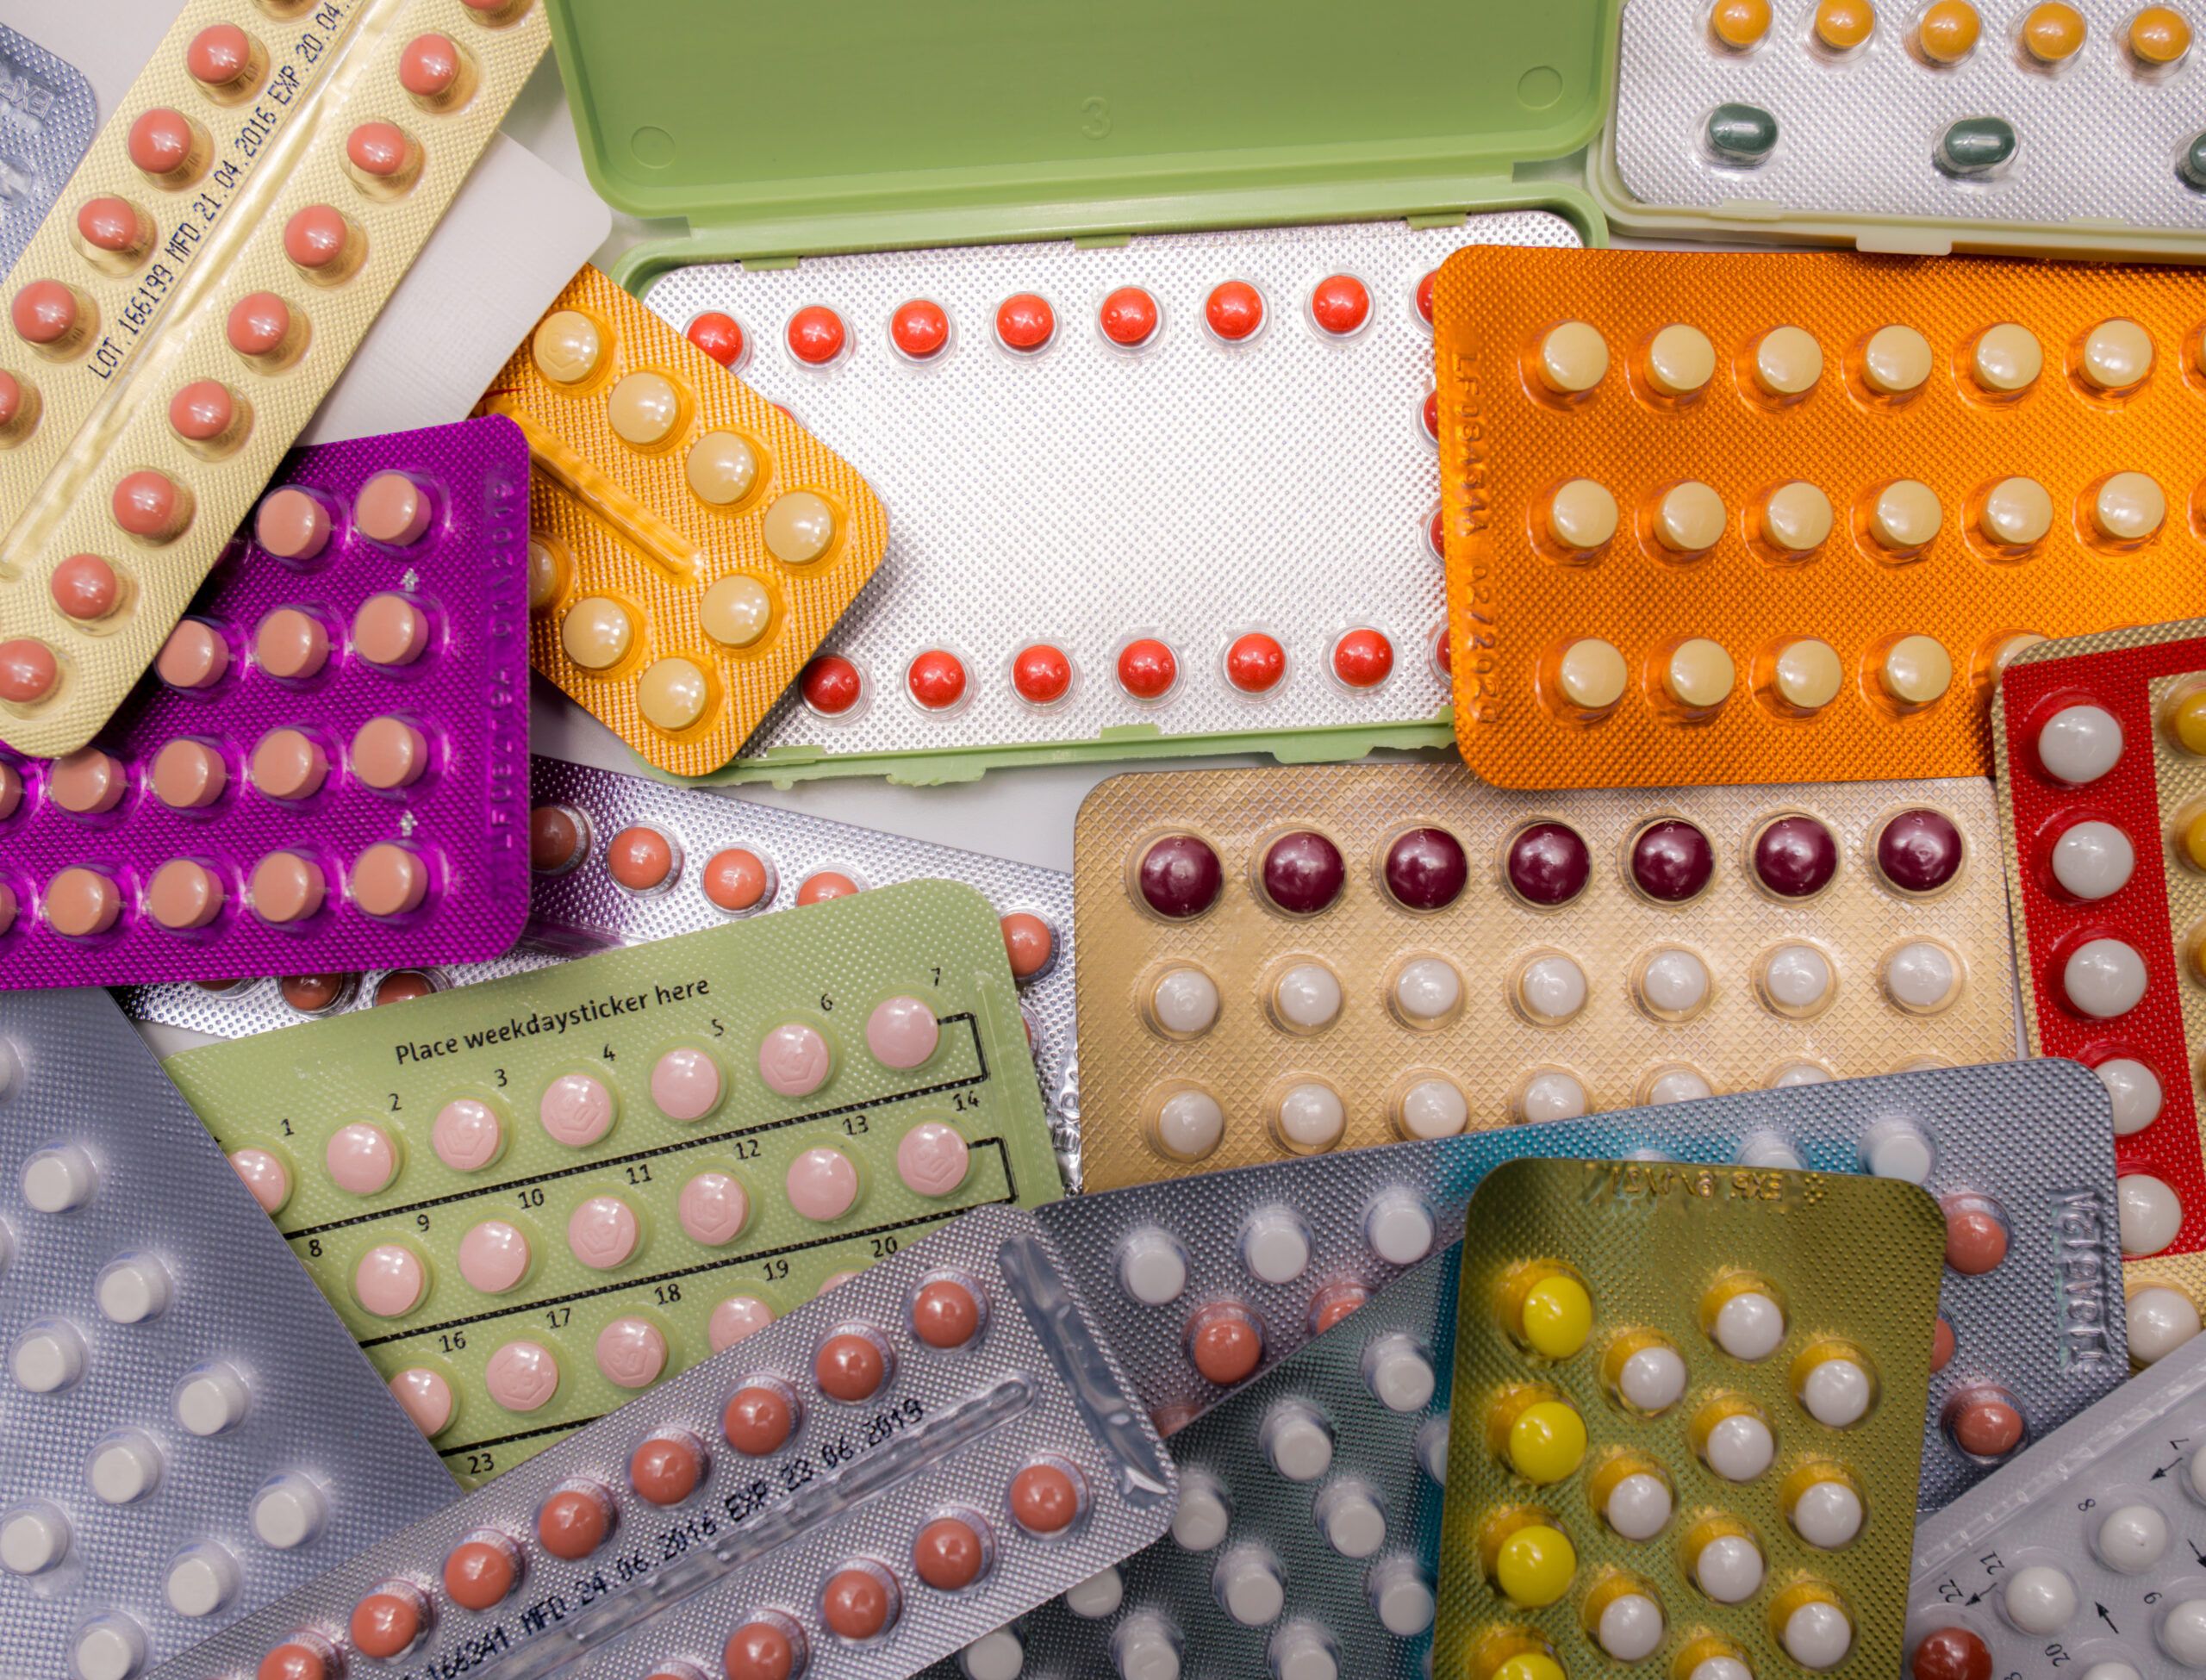 FDA Will Consider Over-the-Counter Progestin-Only Birth Control Pill